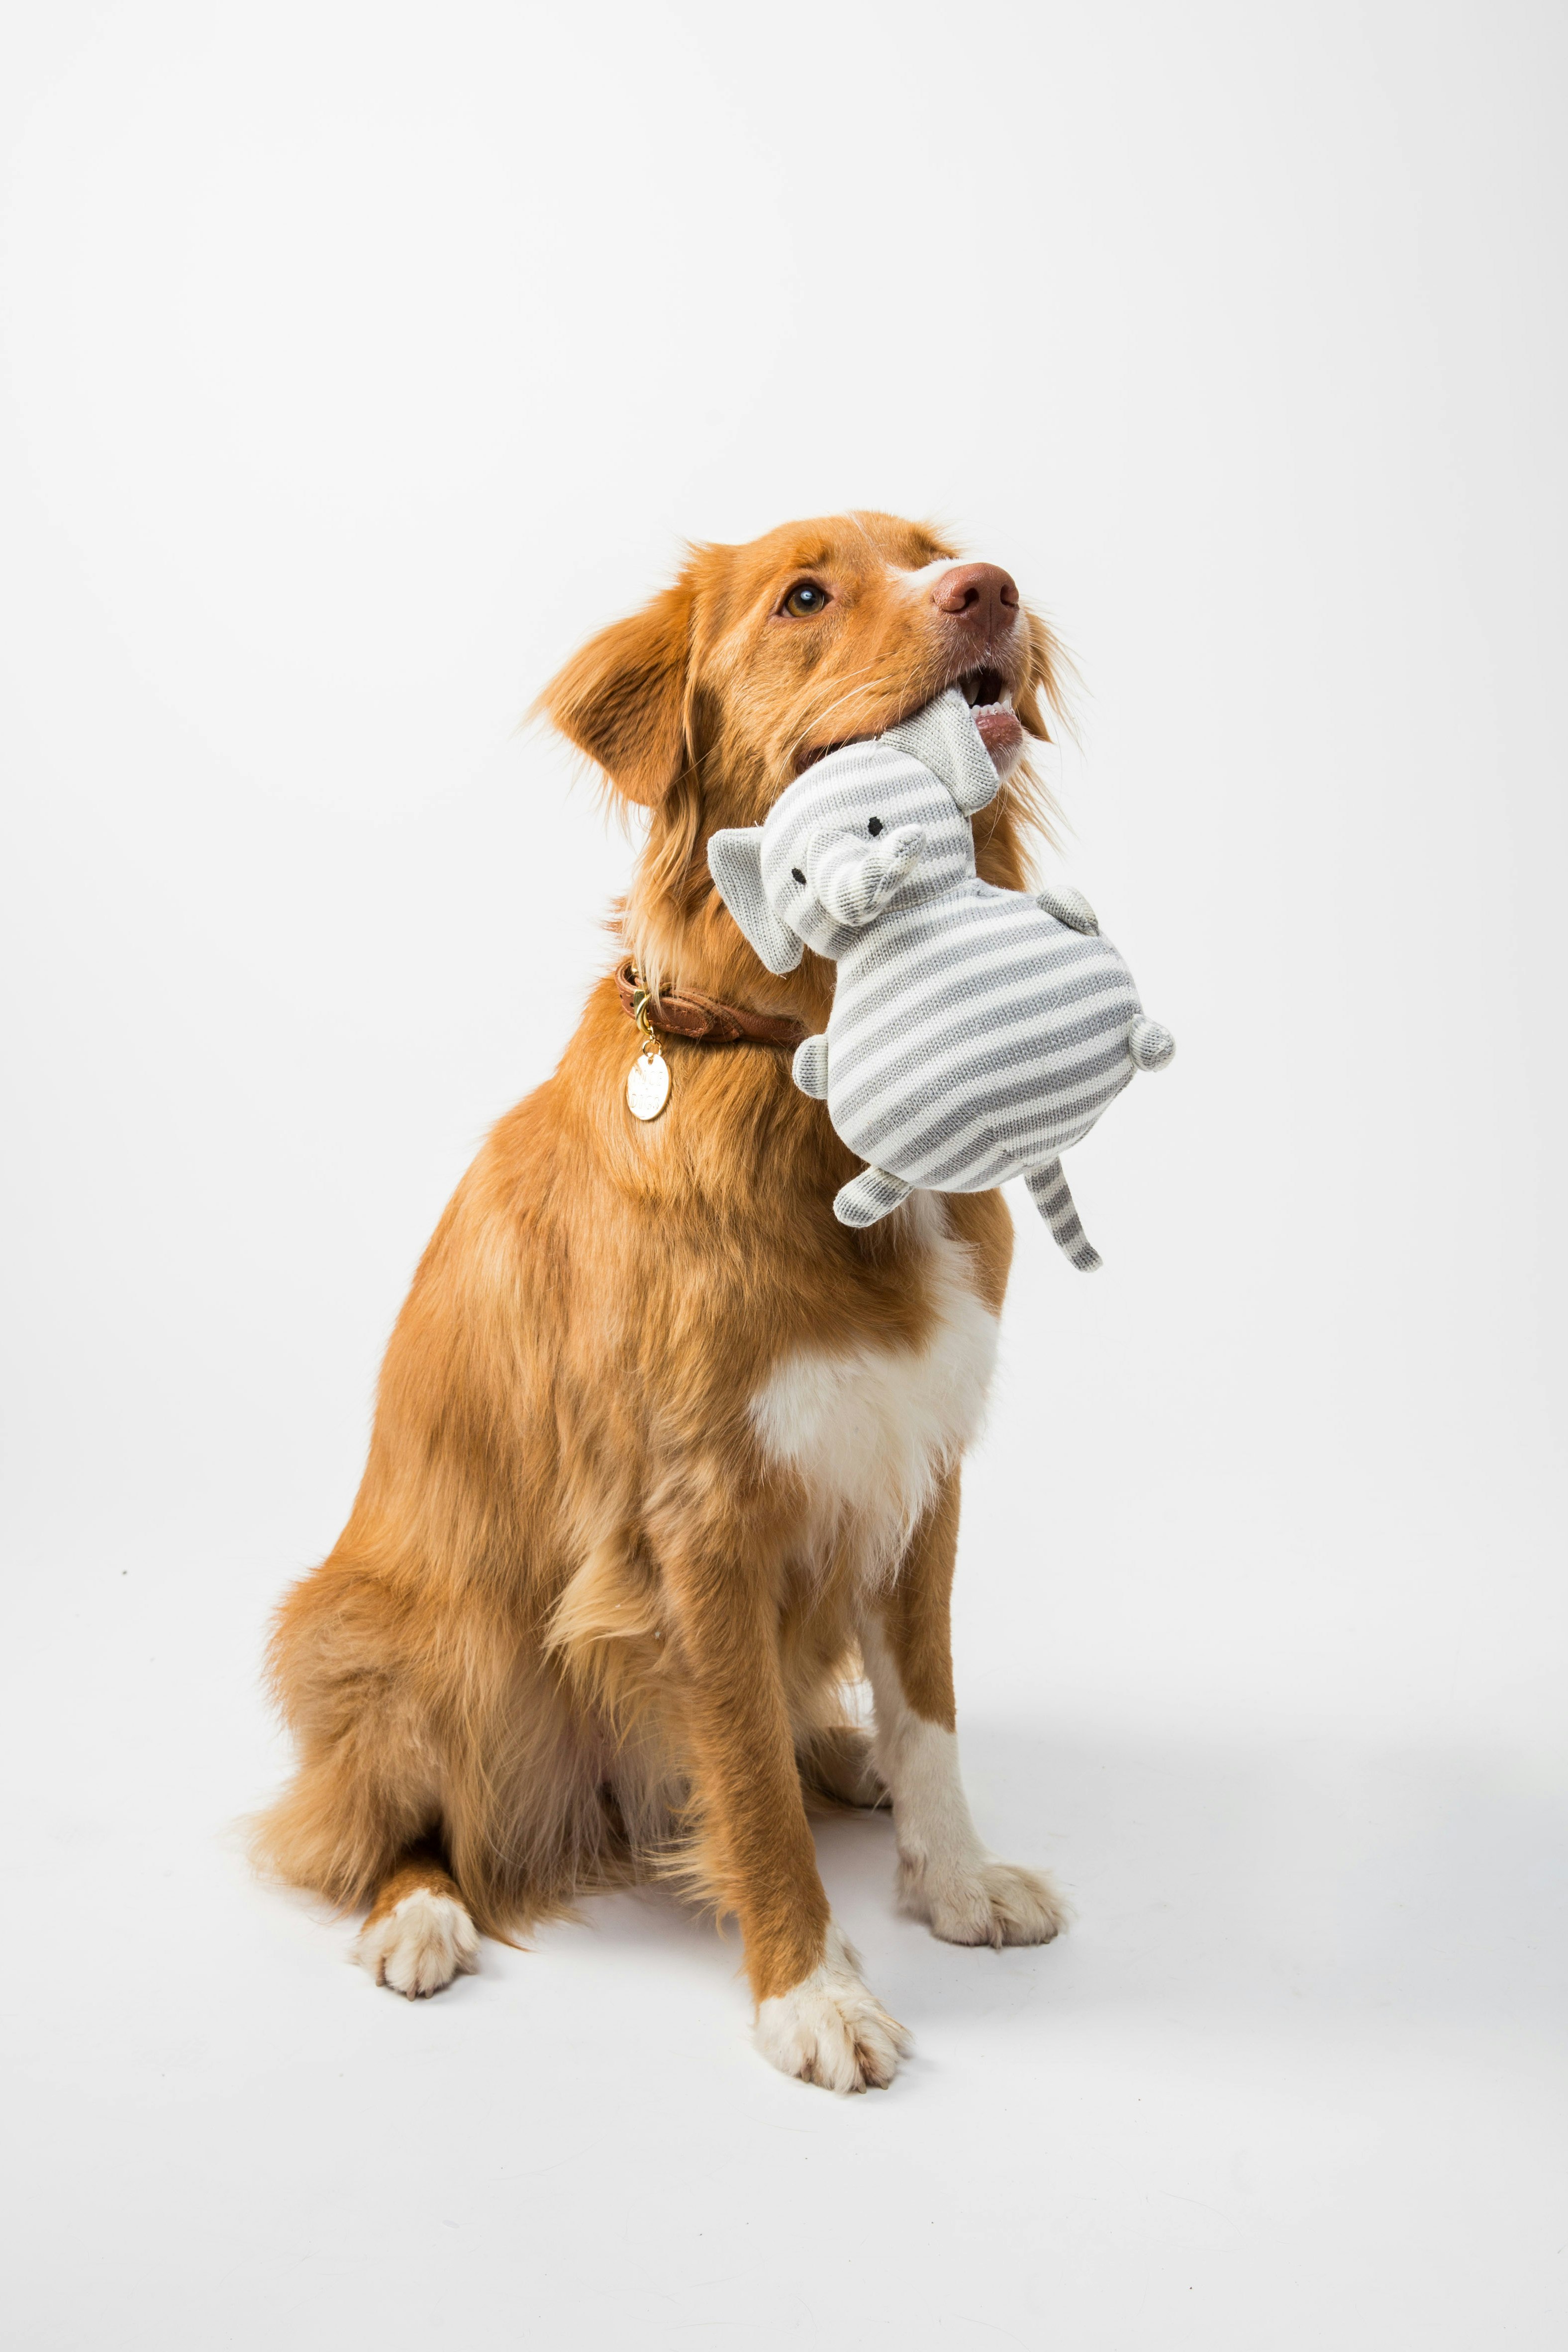 Ever Wonder Why Dogs Shake Their Toys?